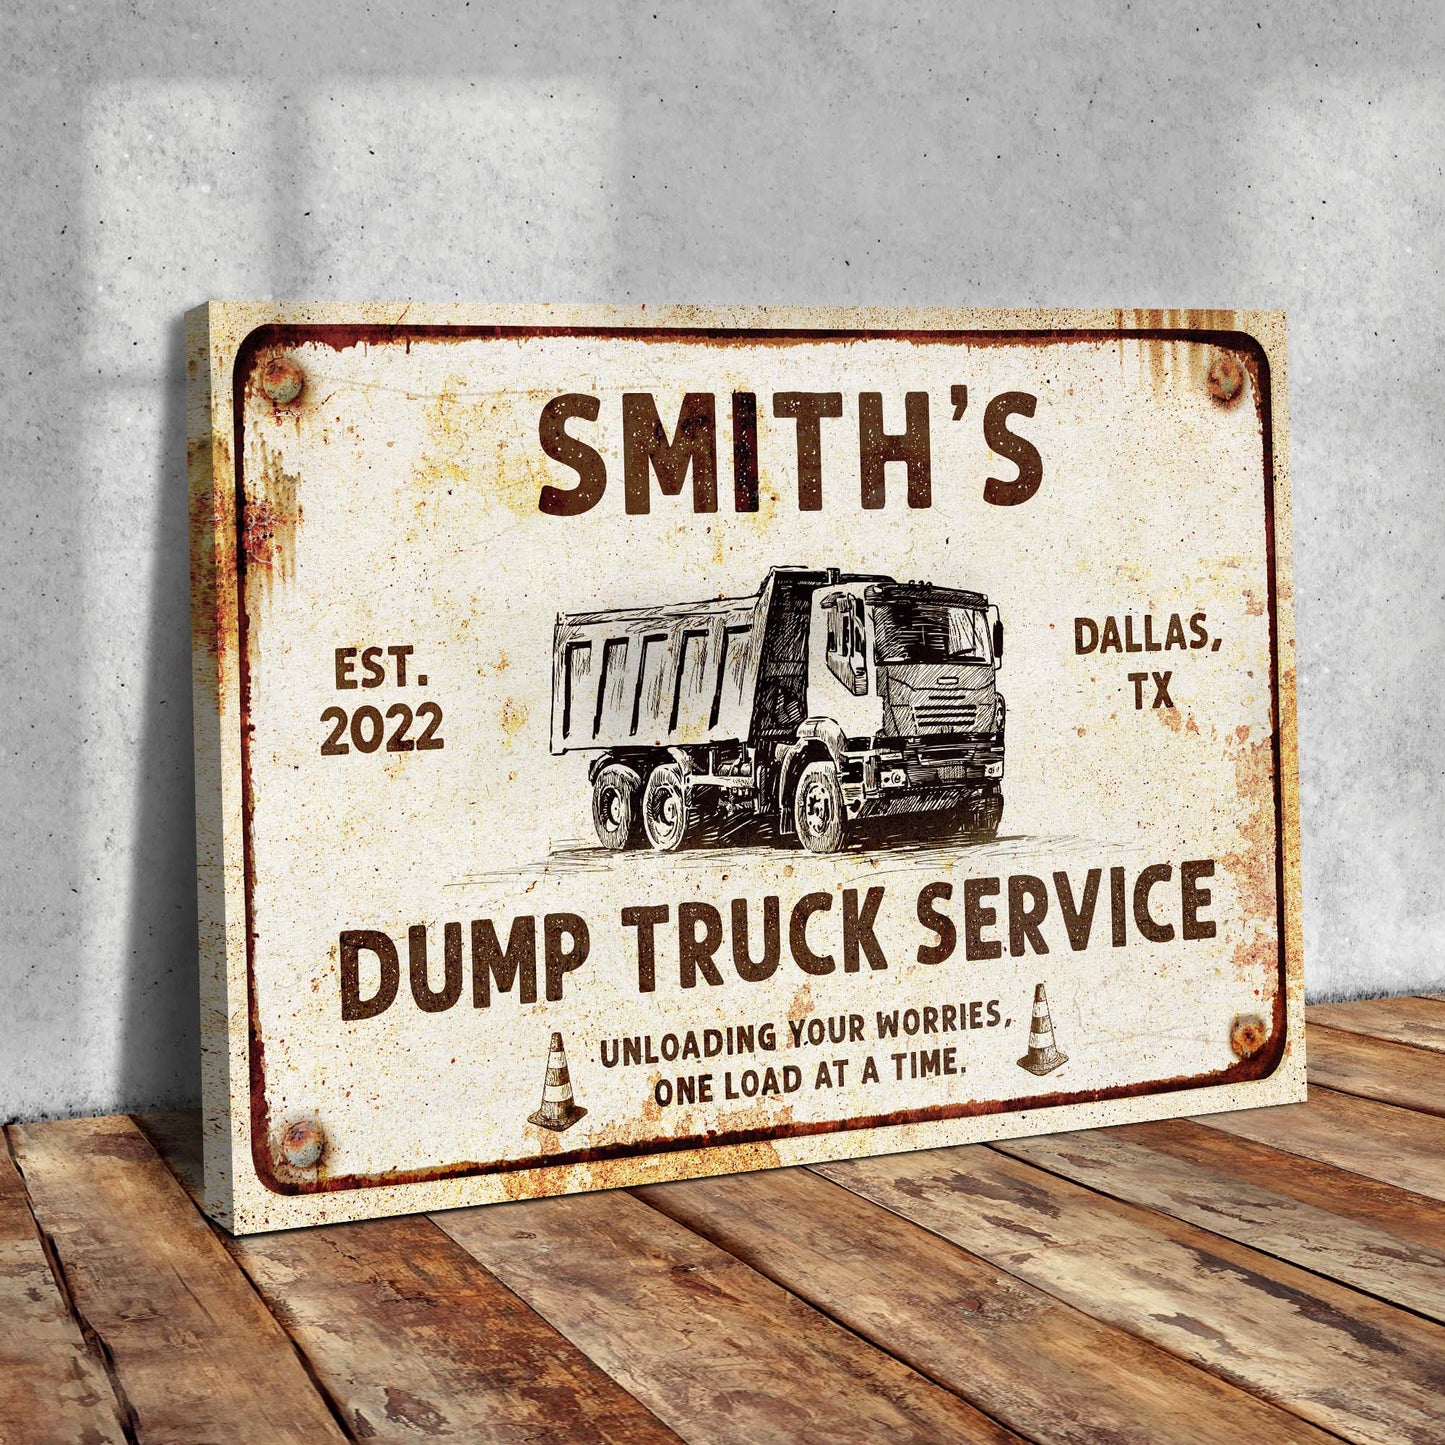 Dump Truck Service Sign - Image by Tailored Canvases